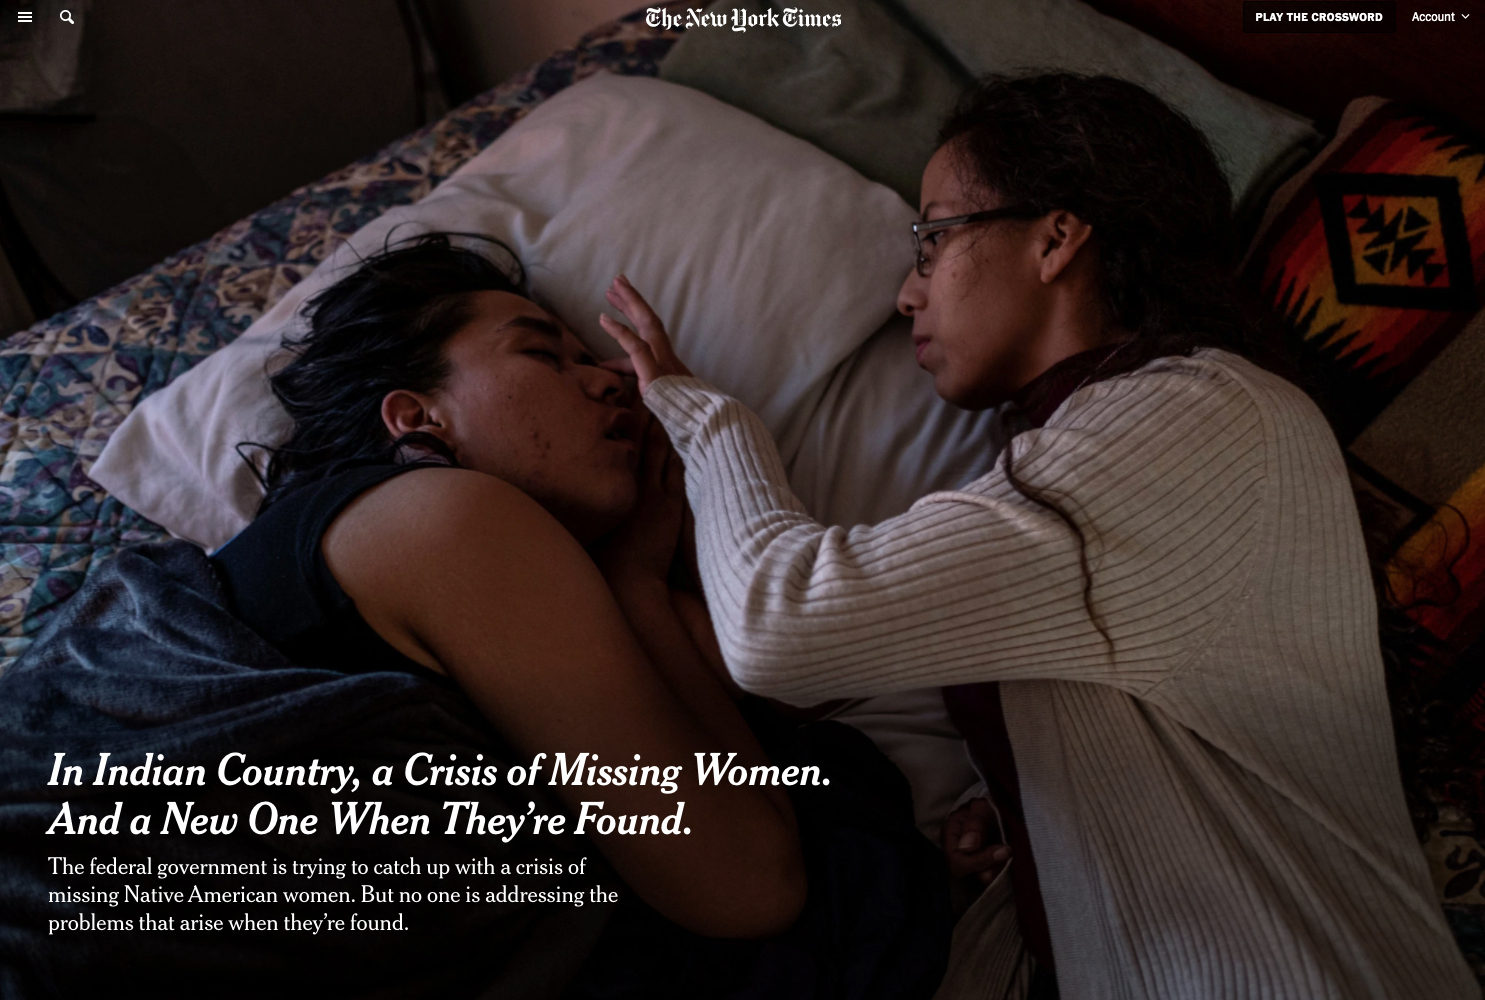 In Indian Country, a Crisis of Missing Women.